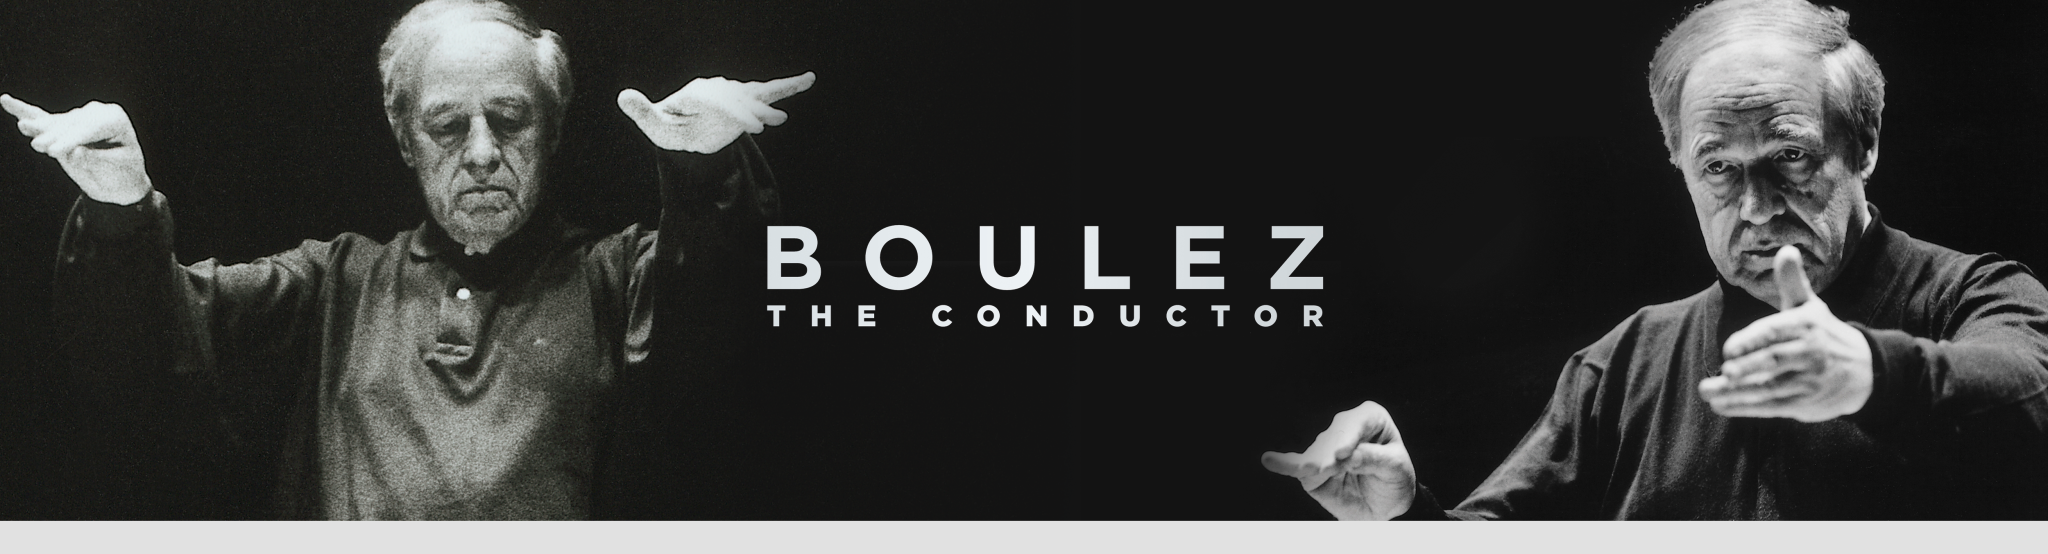 Boulez - The Conductor Banner